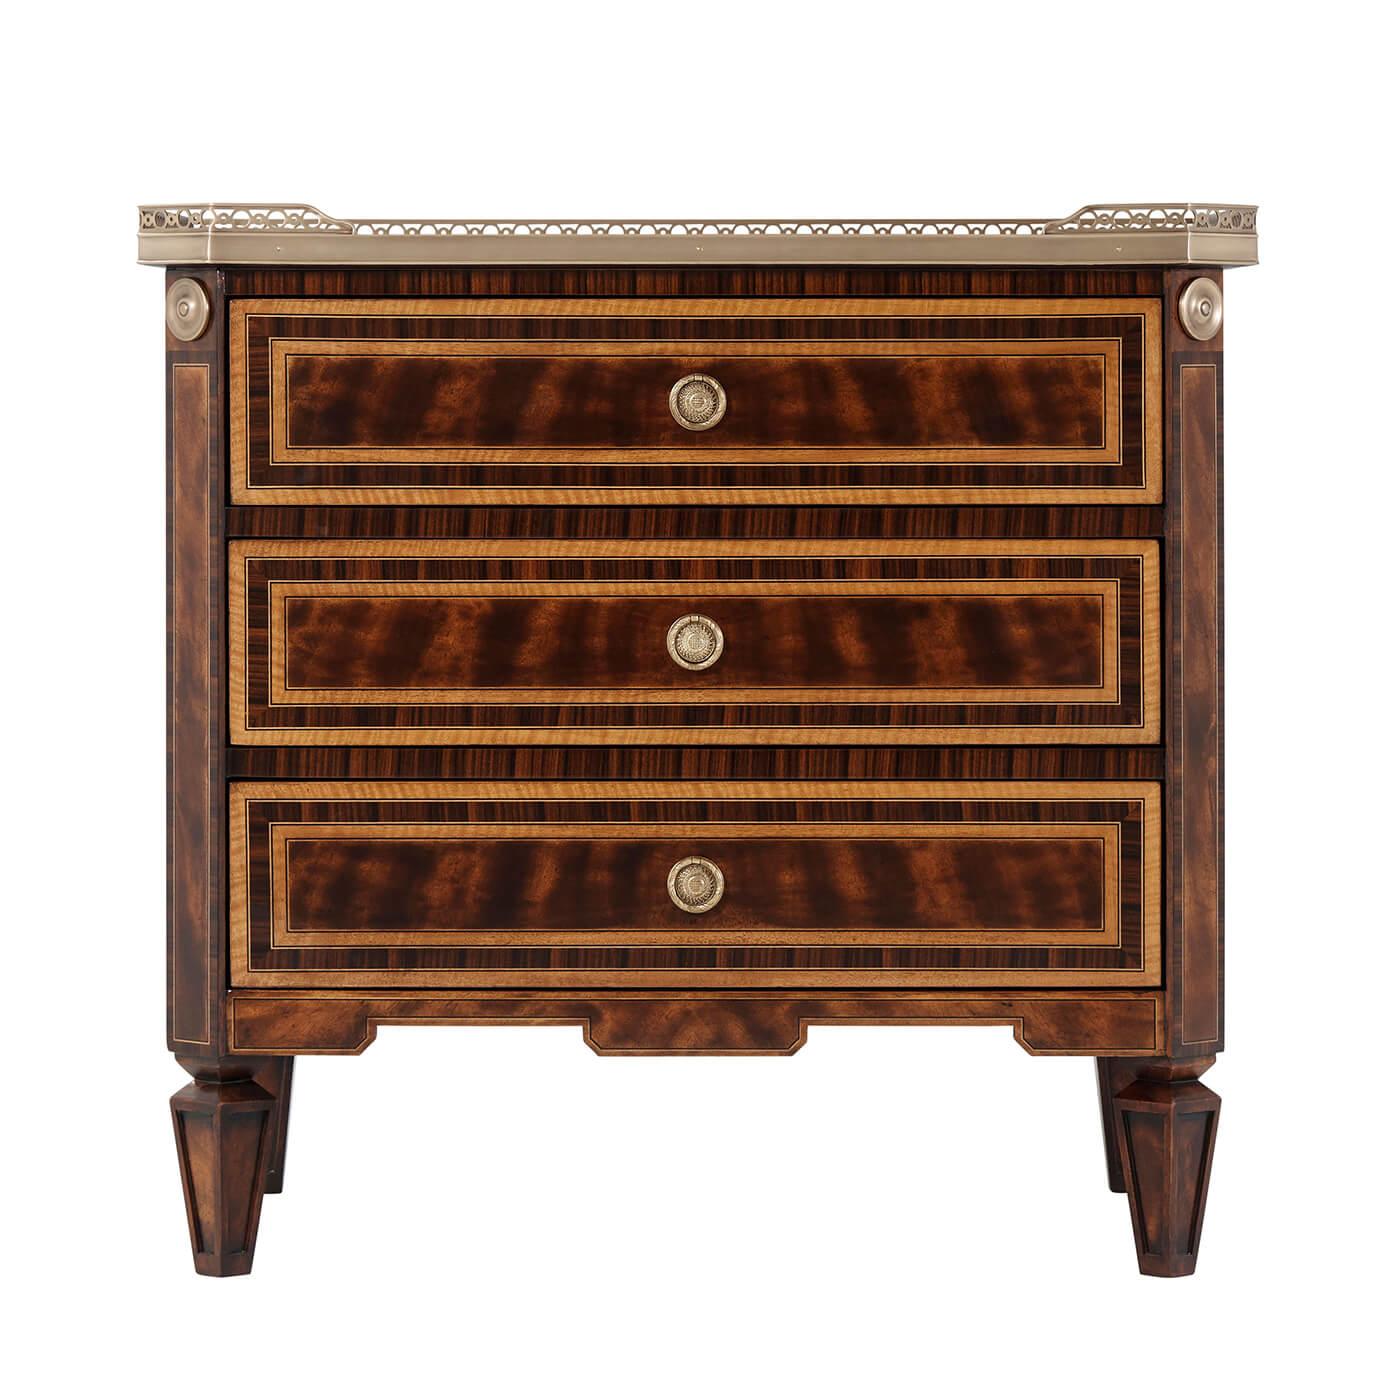 A flame mahogany, Movingue and rosewood banded nightstand, the rectangular top with canted corners and a three quarter brass gallery, three drawers with fine brass handles and on paneled tapering legs.

Dimensions: 28